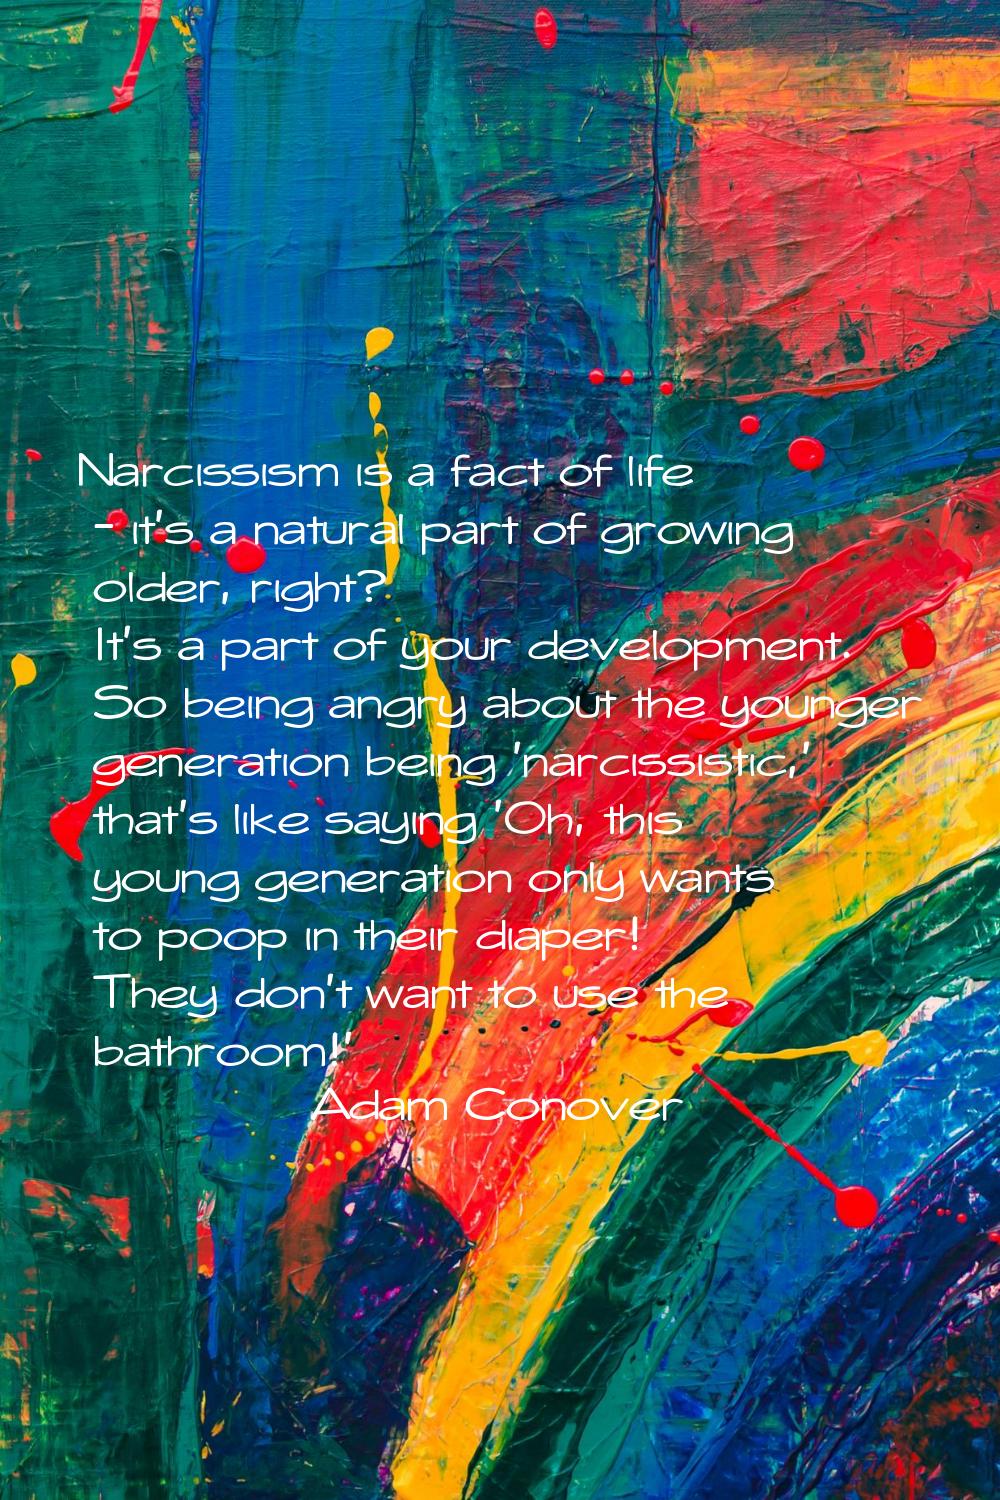 Narcissism is a fact of life - it's a natural part of growing older, right? It's a part of your dev